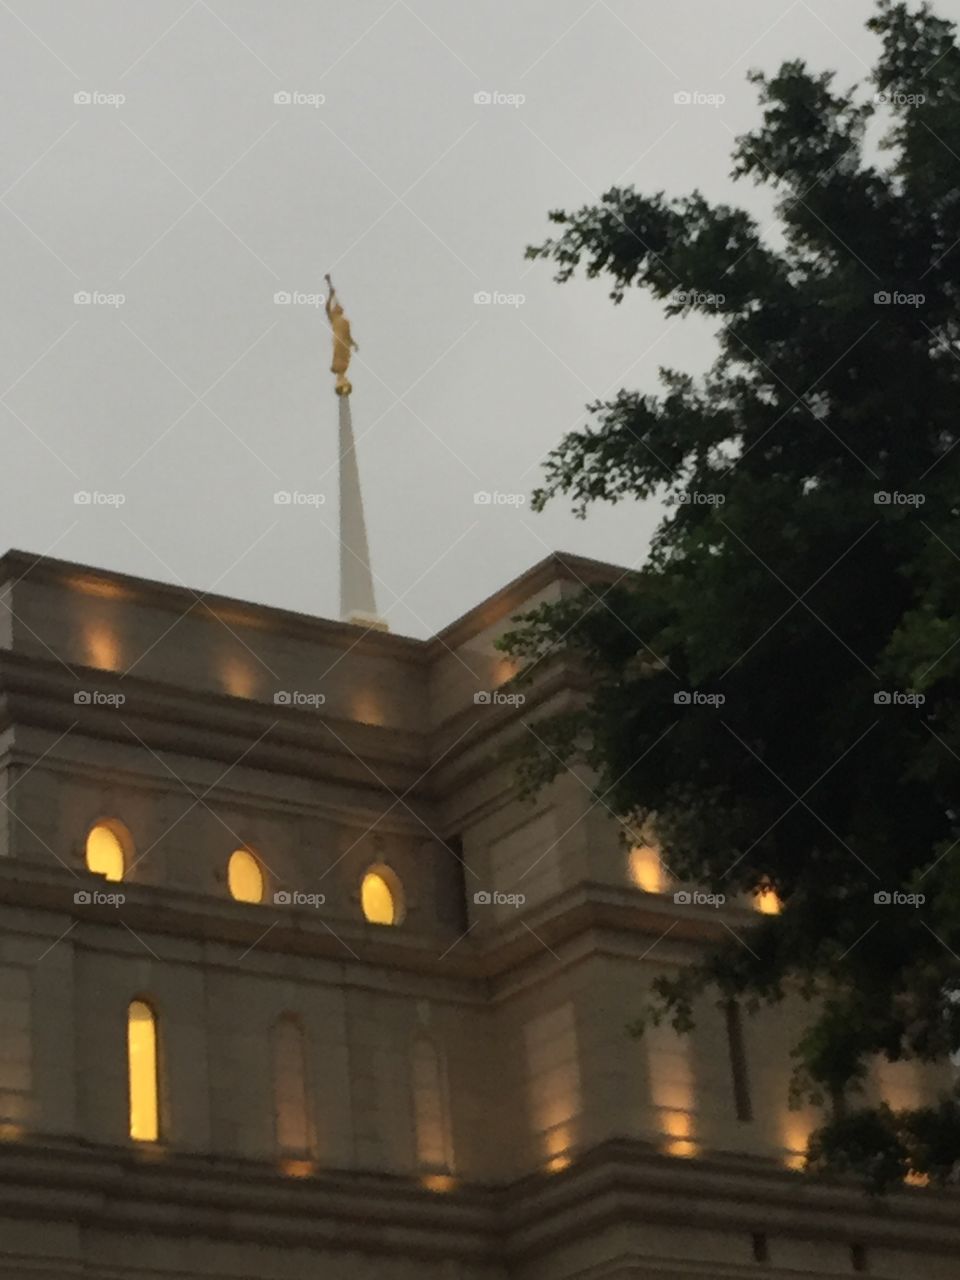 Lights In The Sky. The Church Of Jesus Christ of Latter-Day Saints Holy Temple in Hong Kong China. Angel Moroni facing East, in The East. Culturally Known as The Mormon Church Worship Place. Copyright Chelsea Merkley Photography 2019. 